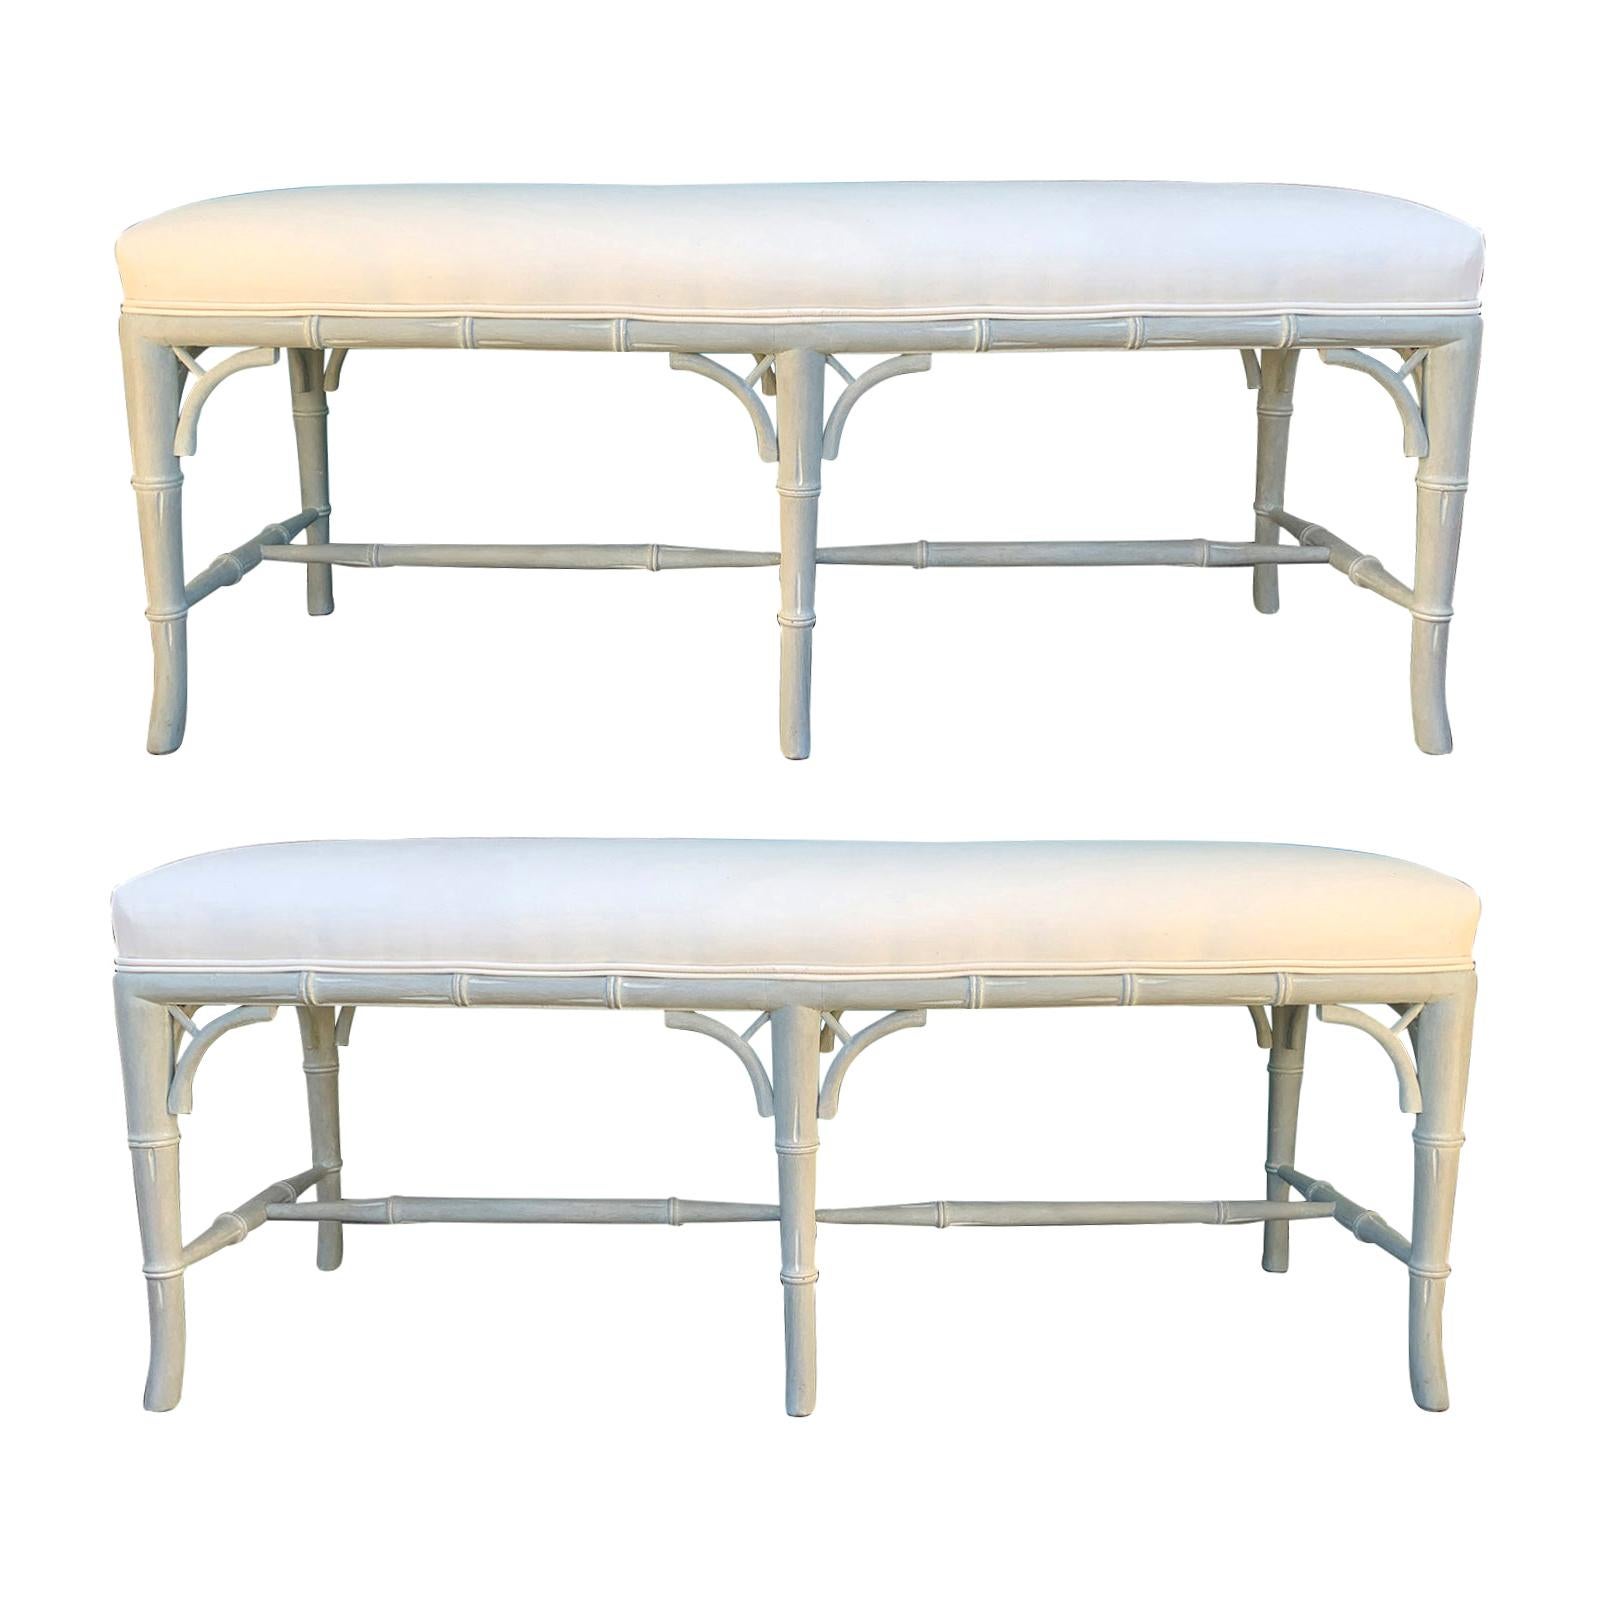 Pair of Long Regency Style Faux Bamboo Benches, Custom Finish, circa 1970s